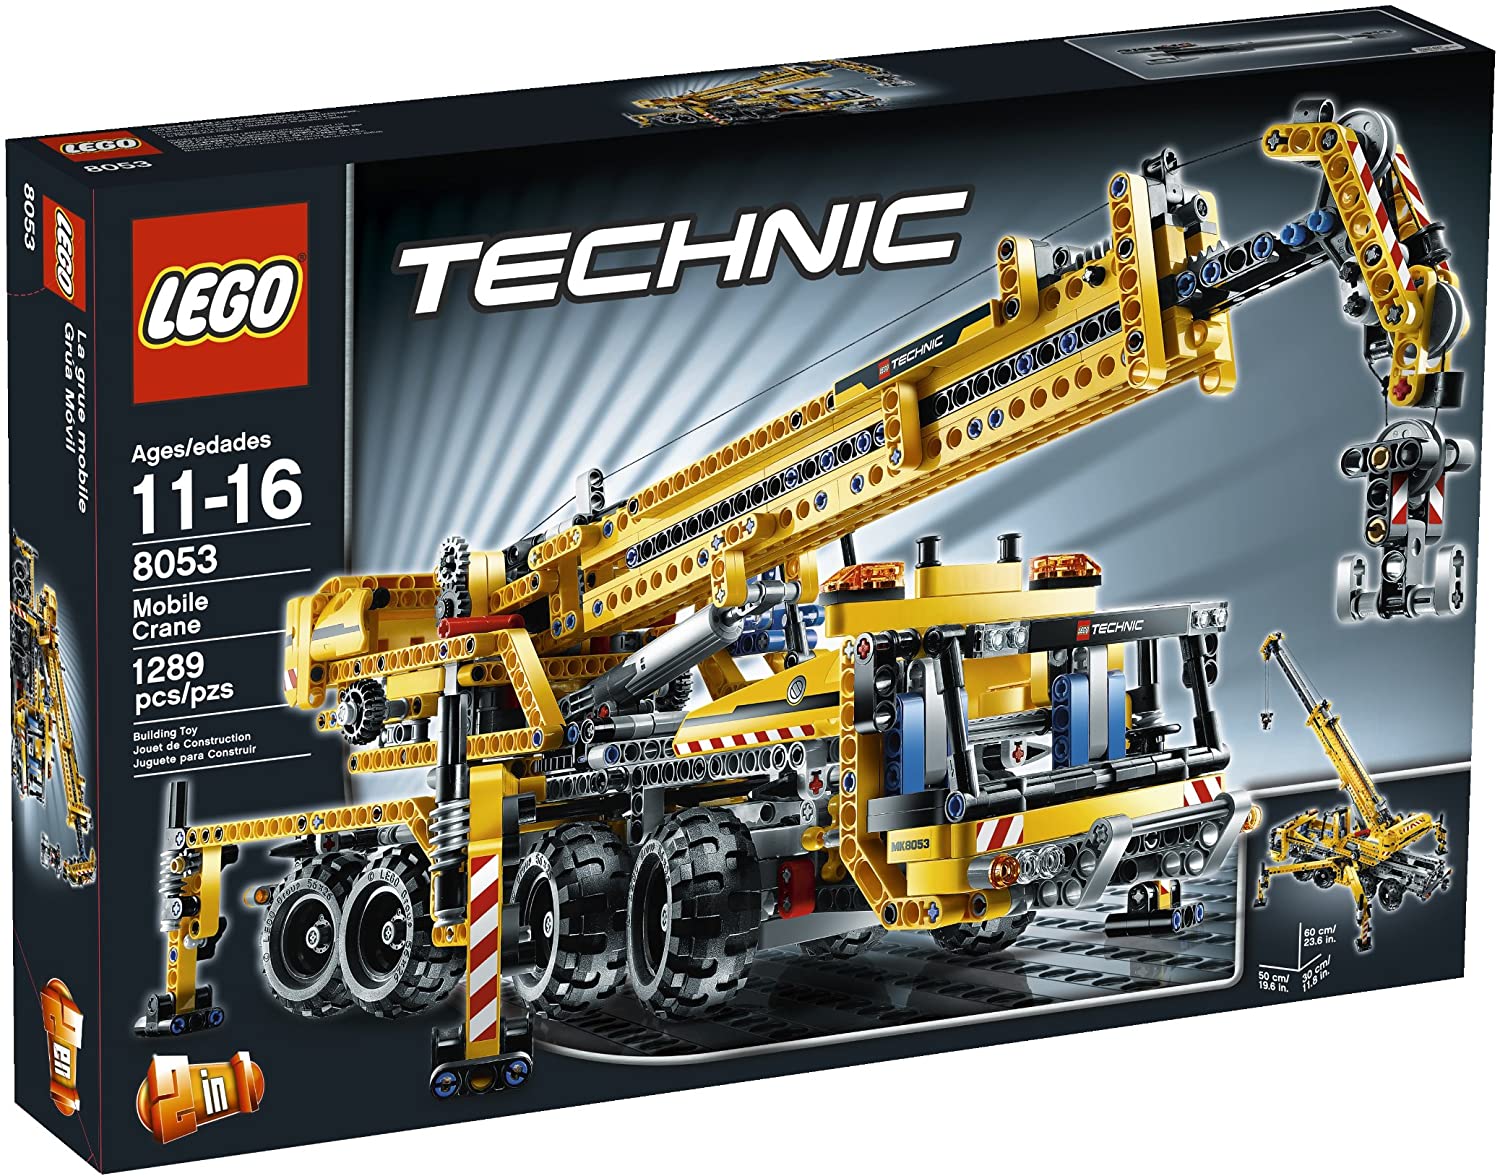 7 Best LEGO Crane Sets 2022 - Buying Guide & Reviews 4